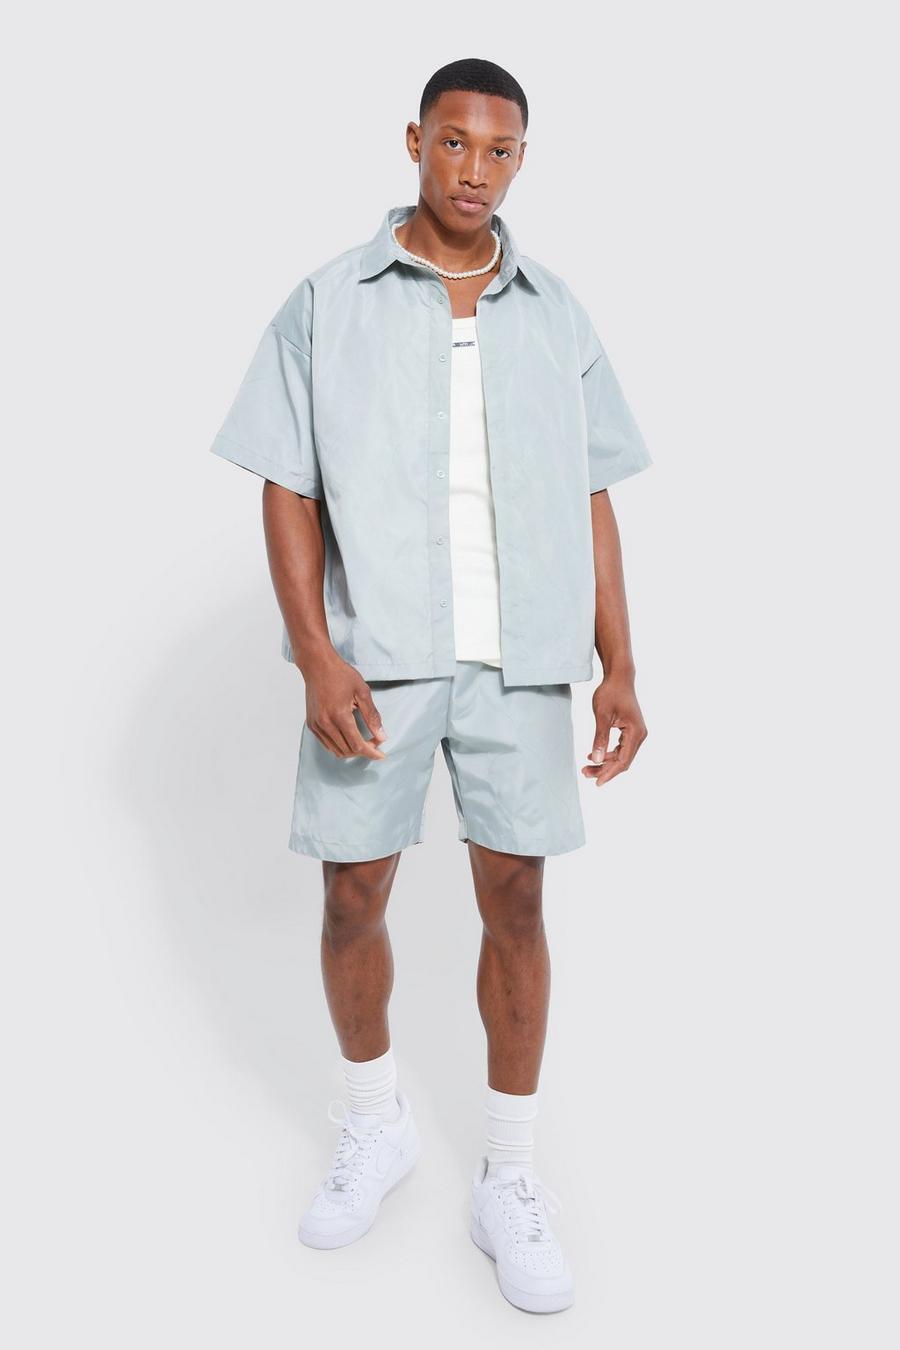 Men's Two Piece Sets | Men's Matching Sets | boohoo Canada